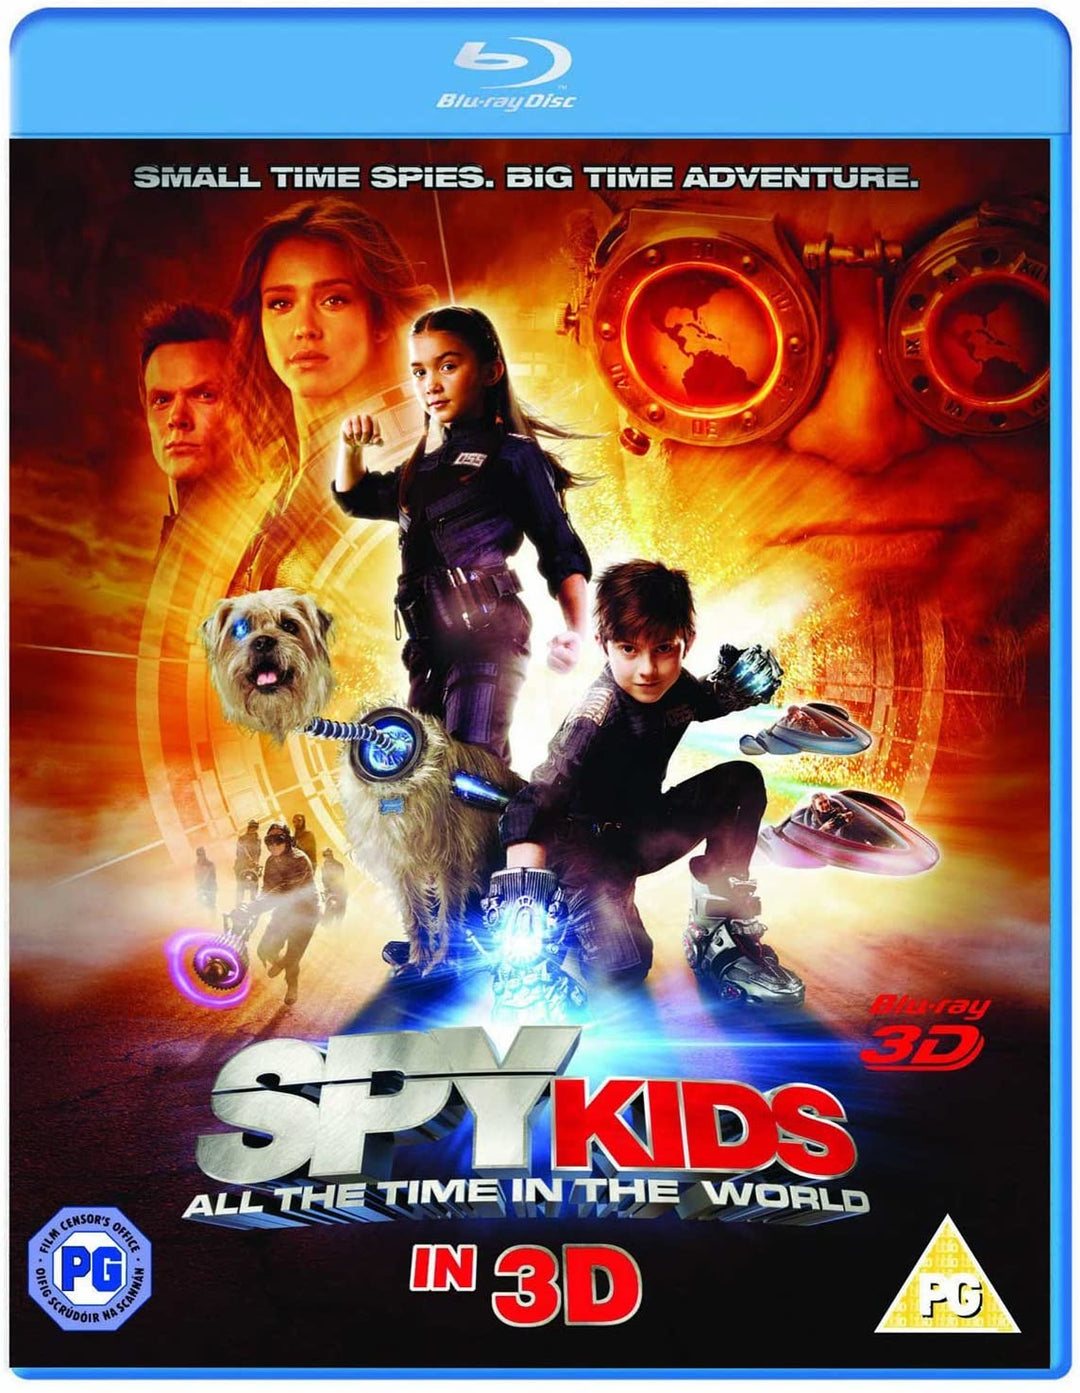 Spy Kids 4: All The Time In The World (Blu-ray 3D) [2017]